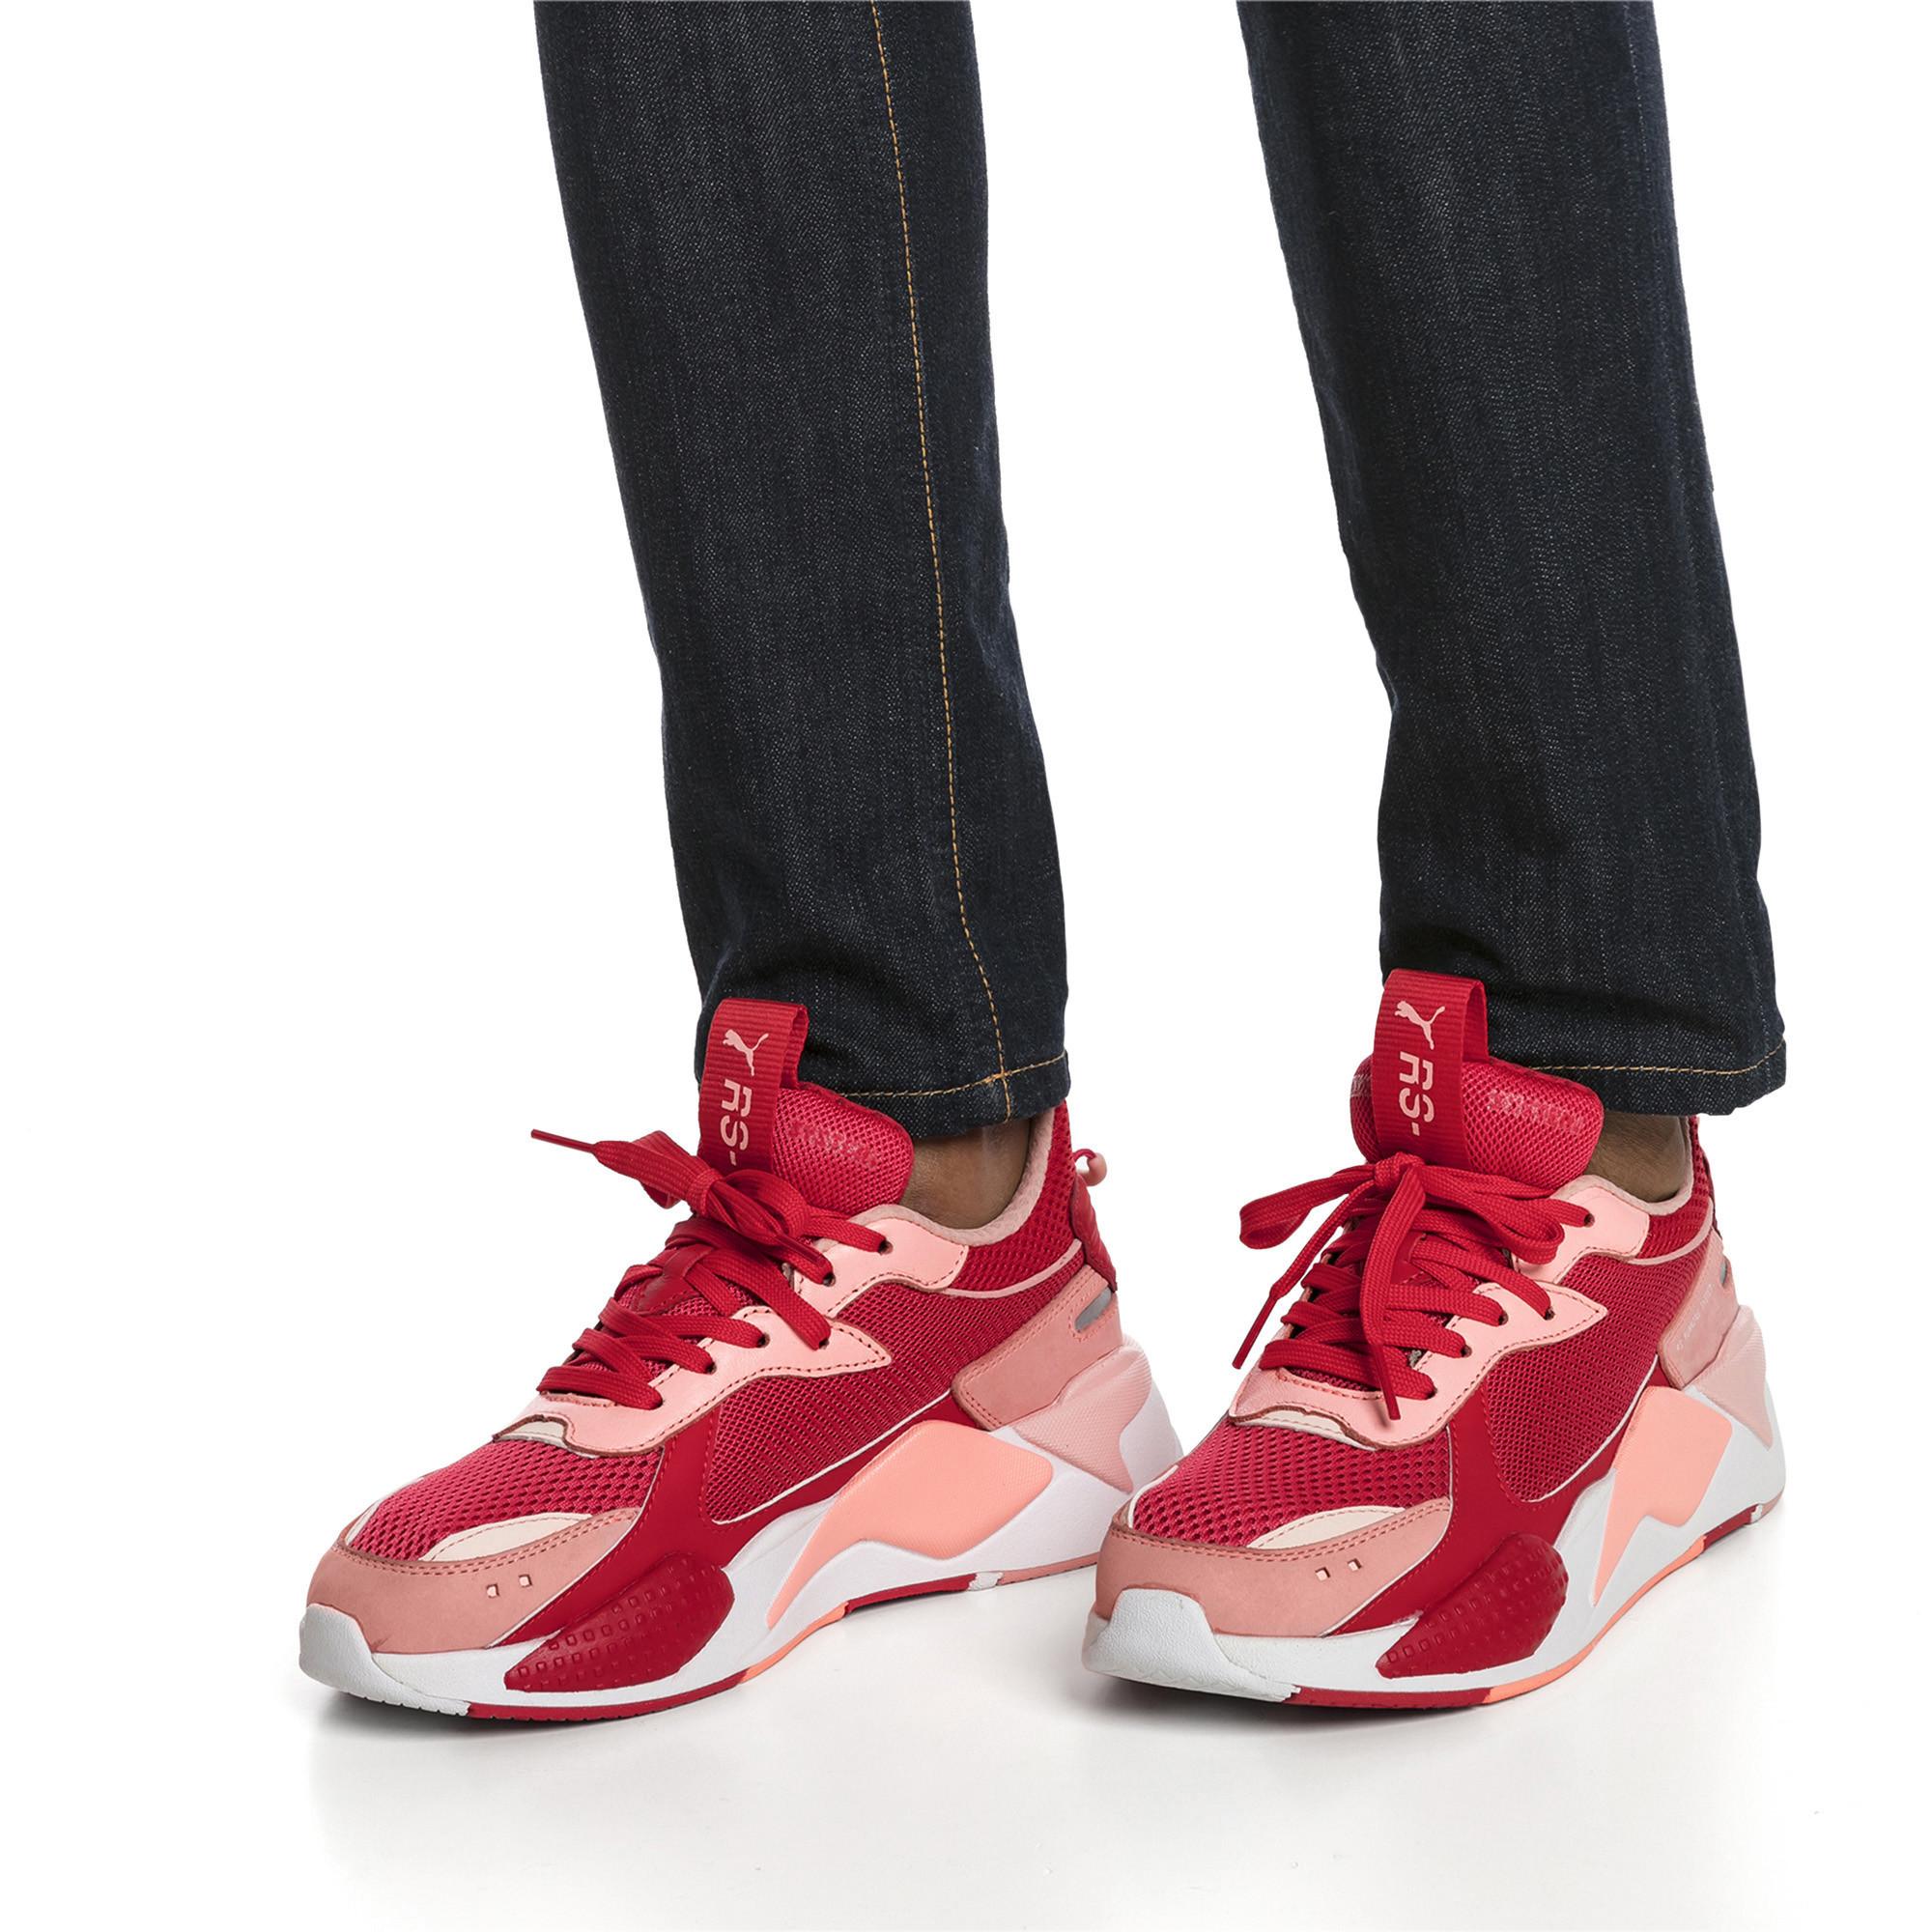 PUMA Rubber Rs-x Toys in Red/Pink (Red) - Lyst